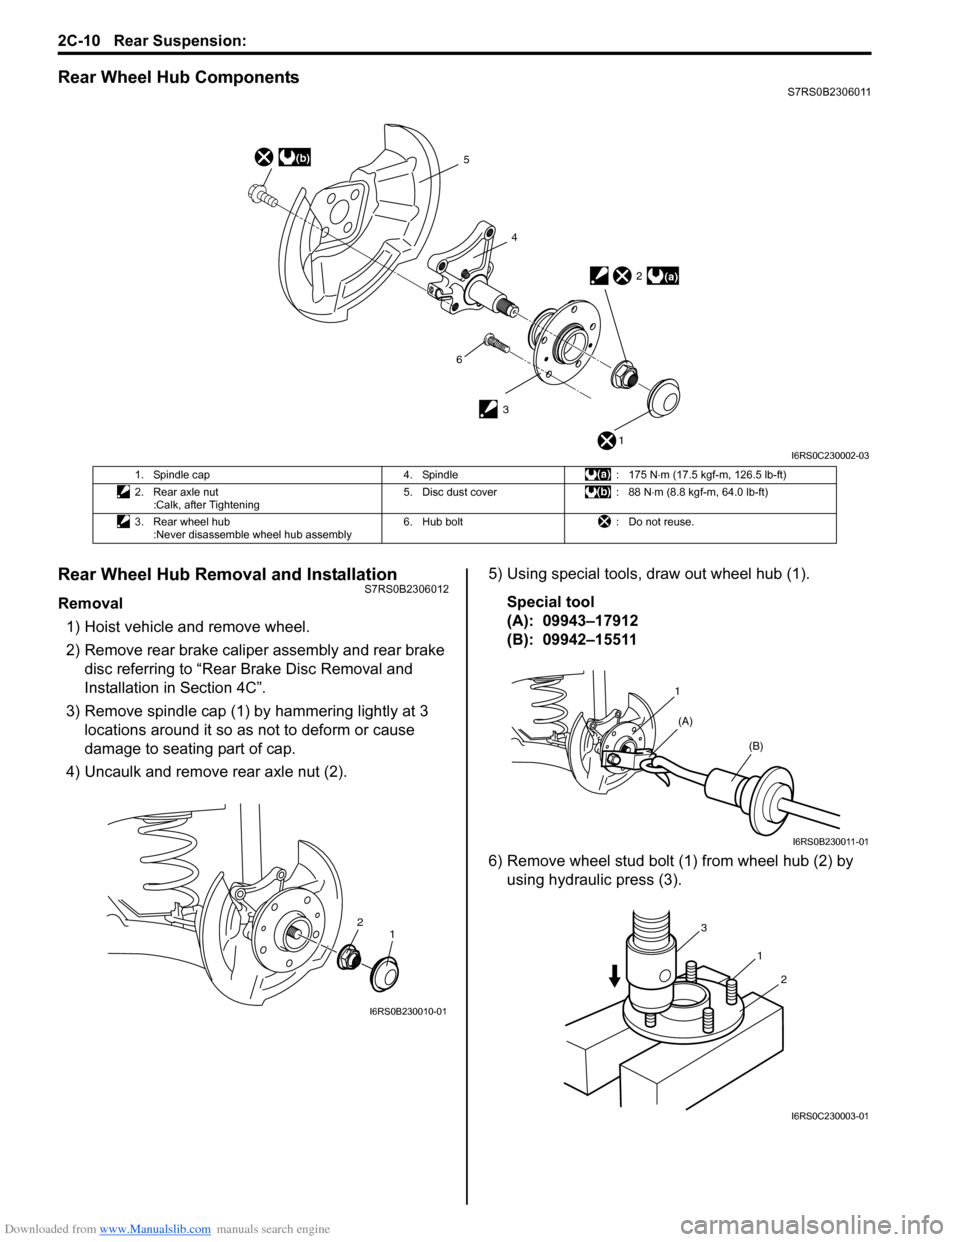 SUZUKI SWIFT 2008 2.G Service Workshop Manual Downloaded from www.Manualslib.com manuals search engine 2C-10 Rear Suspension: 
Rear Wheel Hub ComponentsS7RS0B2306011
Rear Wheel Hub Removal and InstallationS7RS0B2306012
Removal1) Hoist vehicle and